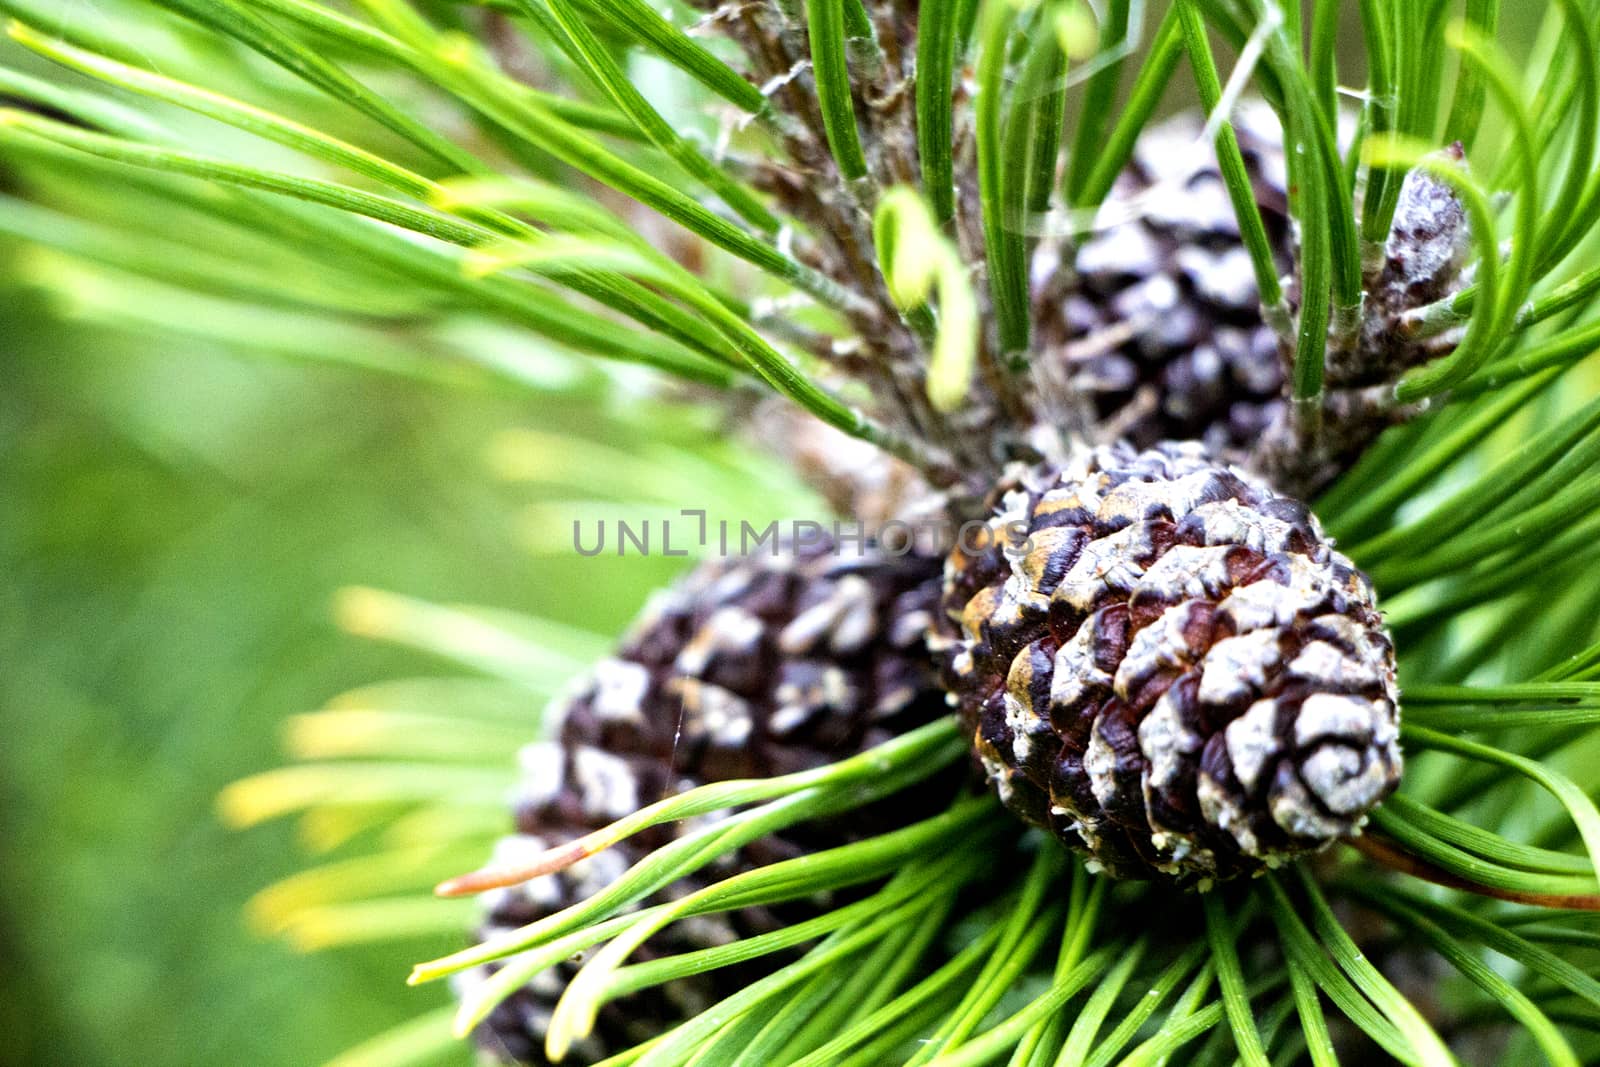 Spruce Cones by Mads_Hjorth_Jakobsen